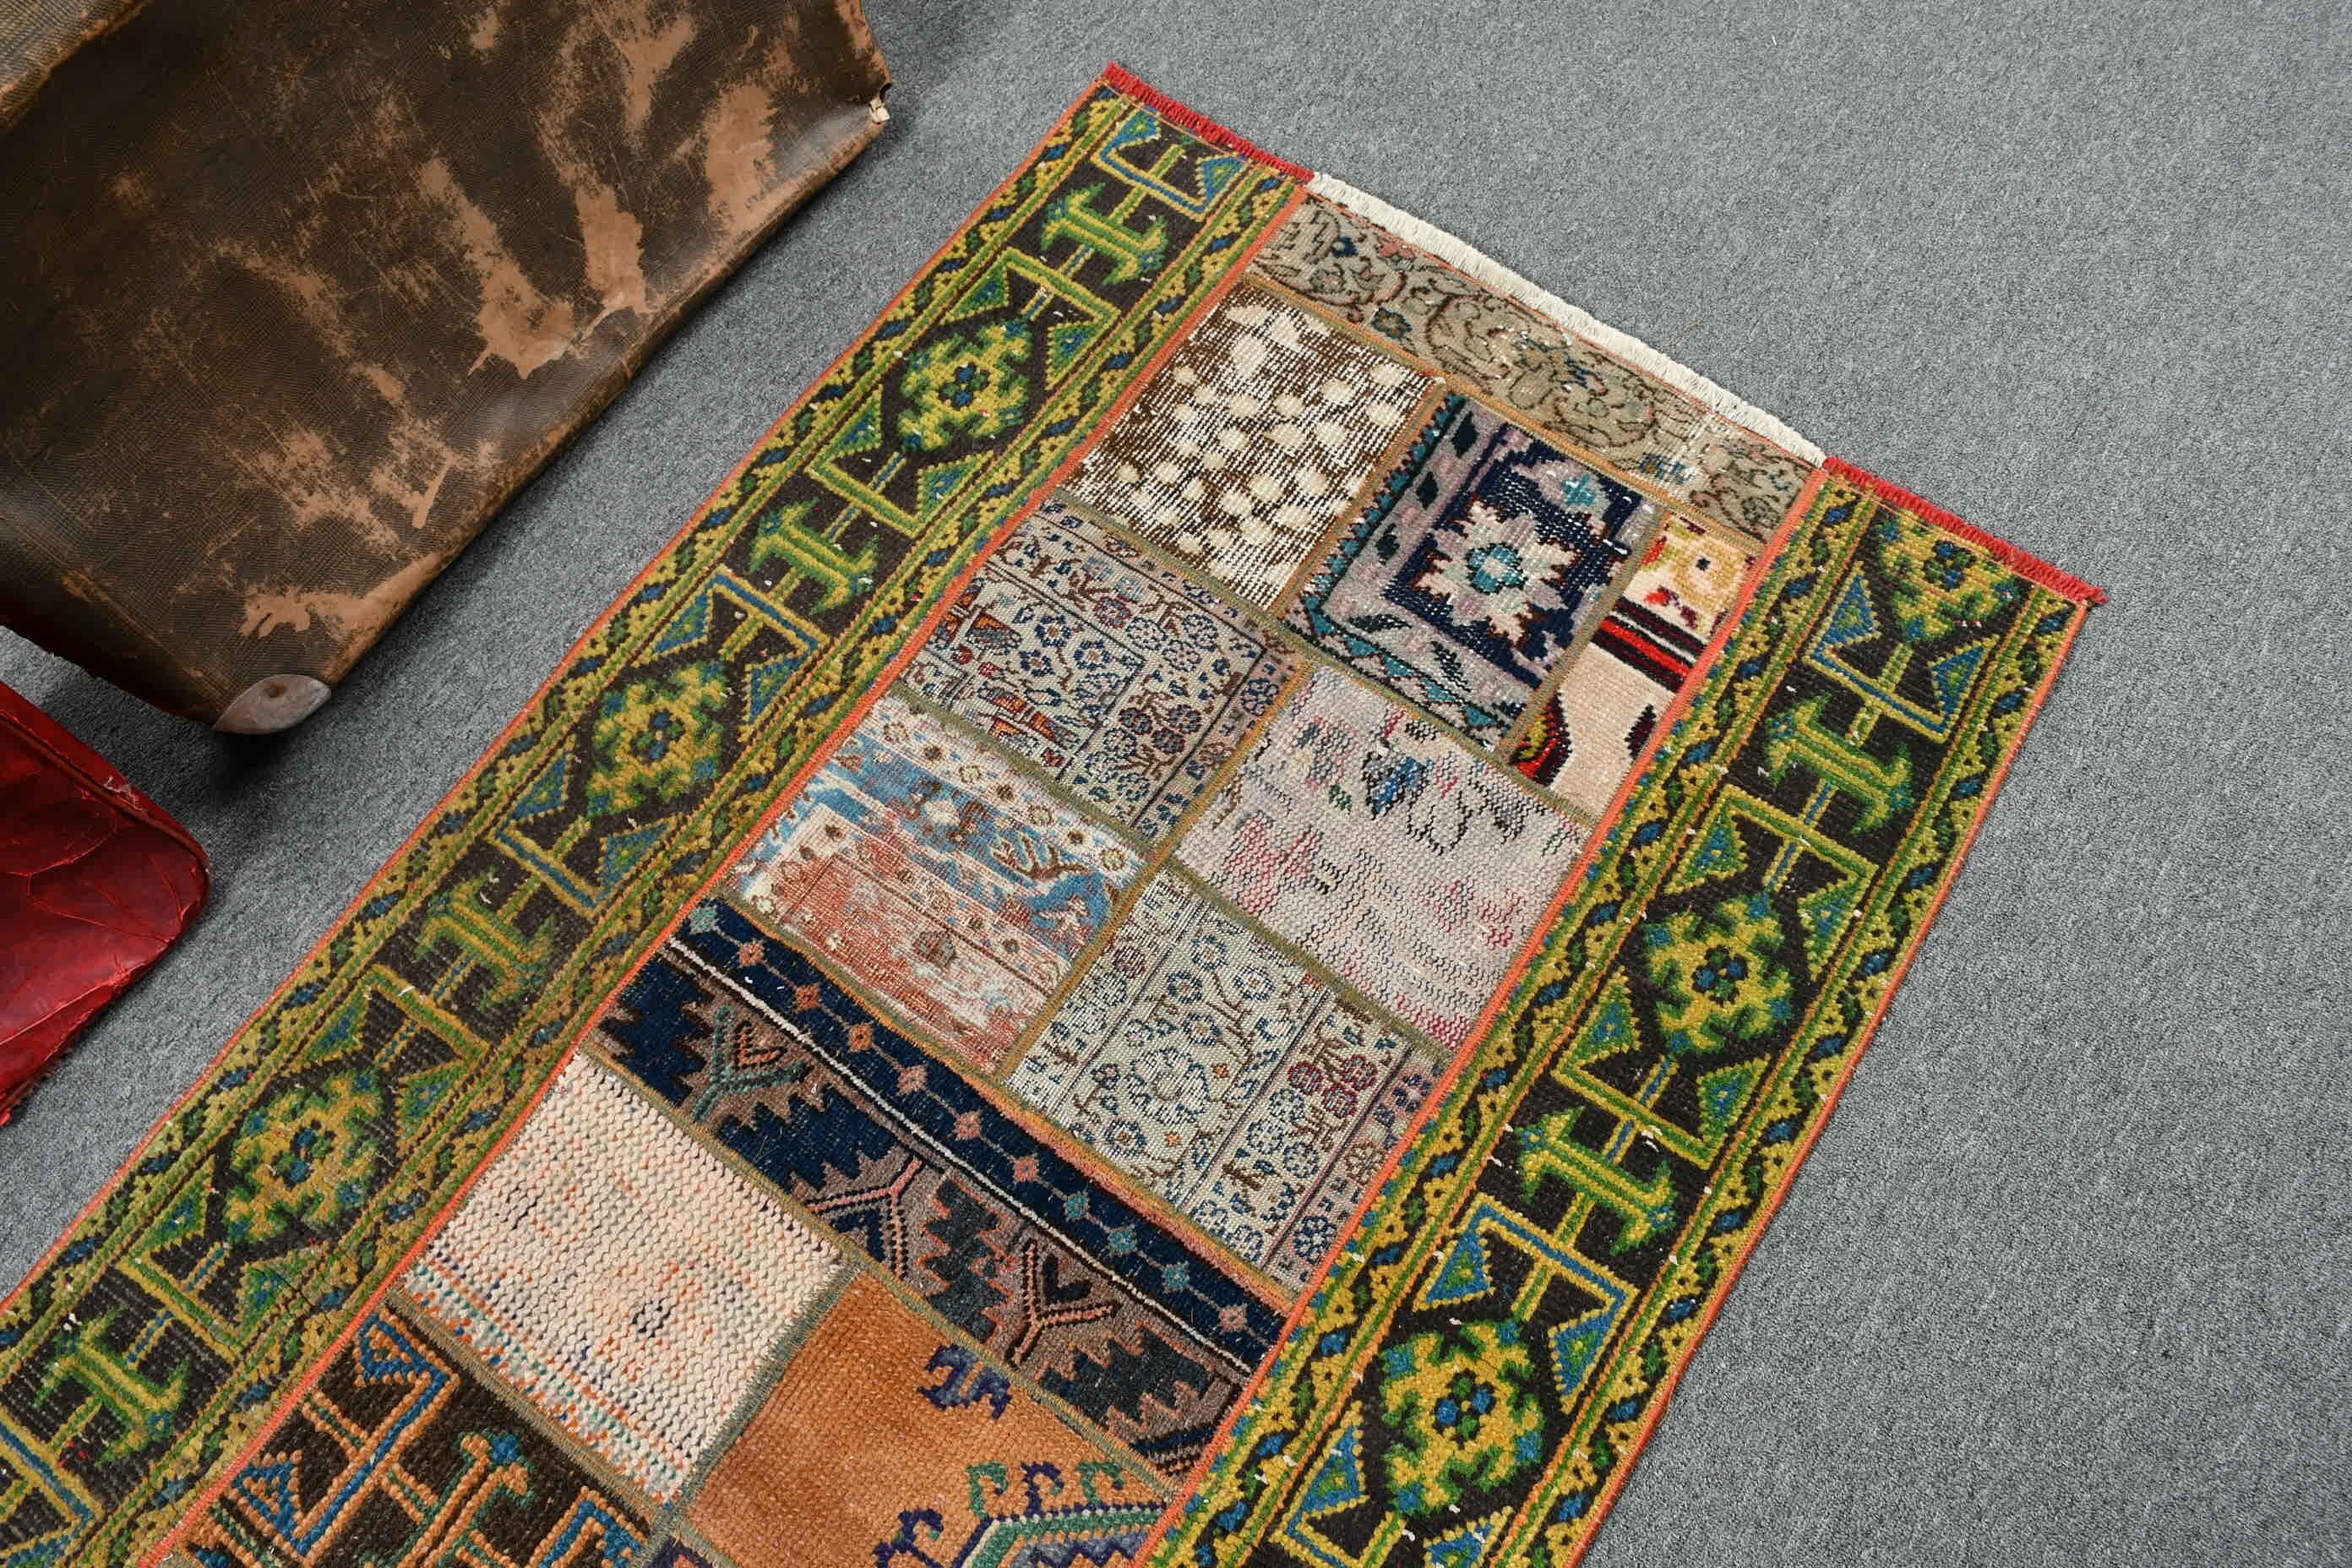 Rugs for Kitchen, Kitchen Rugs, Turkish Rugs, 2.9x5.5 ft Accent Rug, Moroccan Rugs, Green Floor Rugs, Vintage Rug, Tribal Rugs, Bedroom Rug